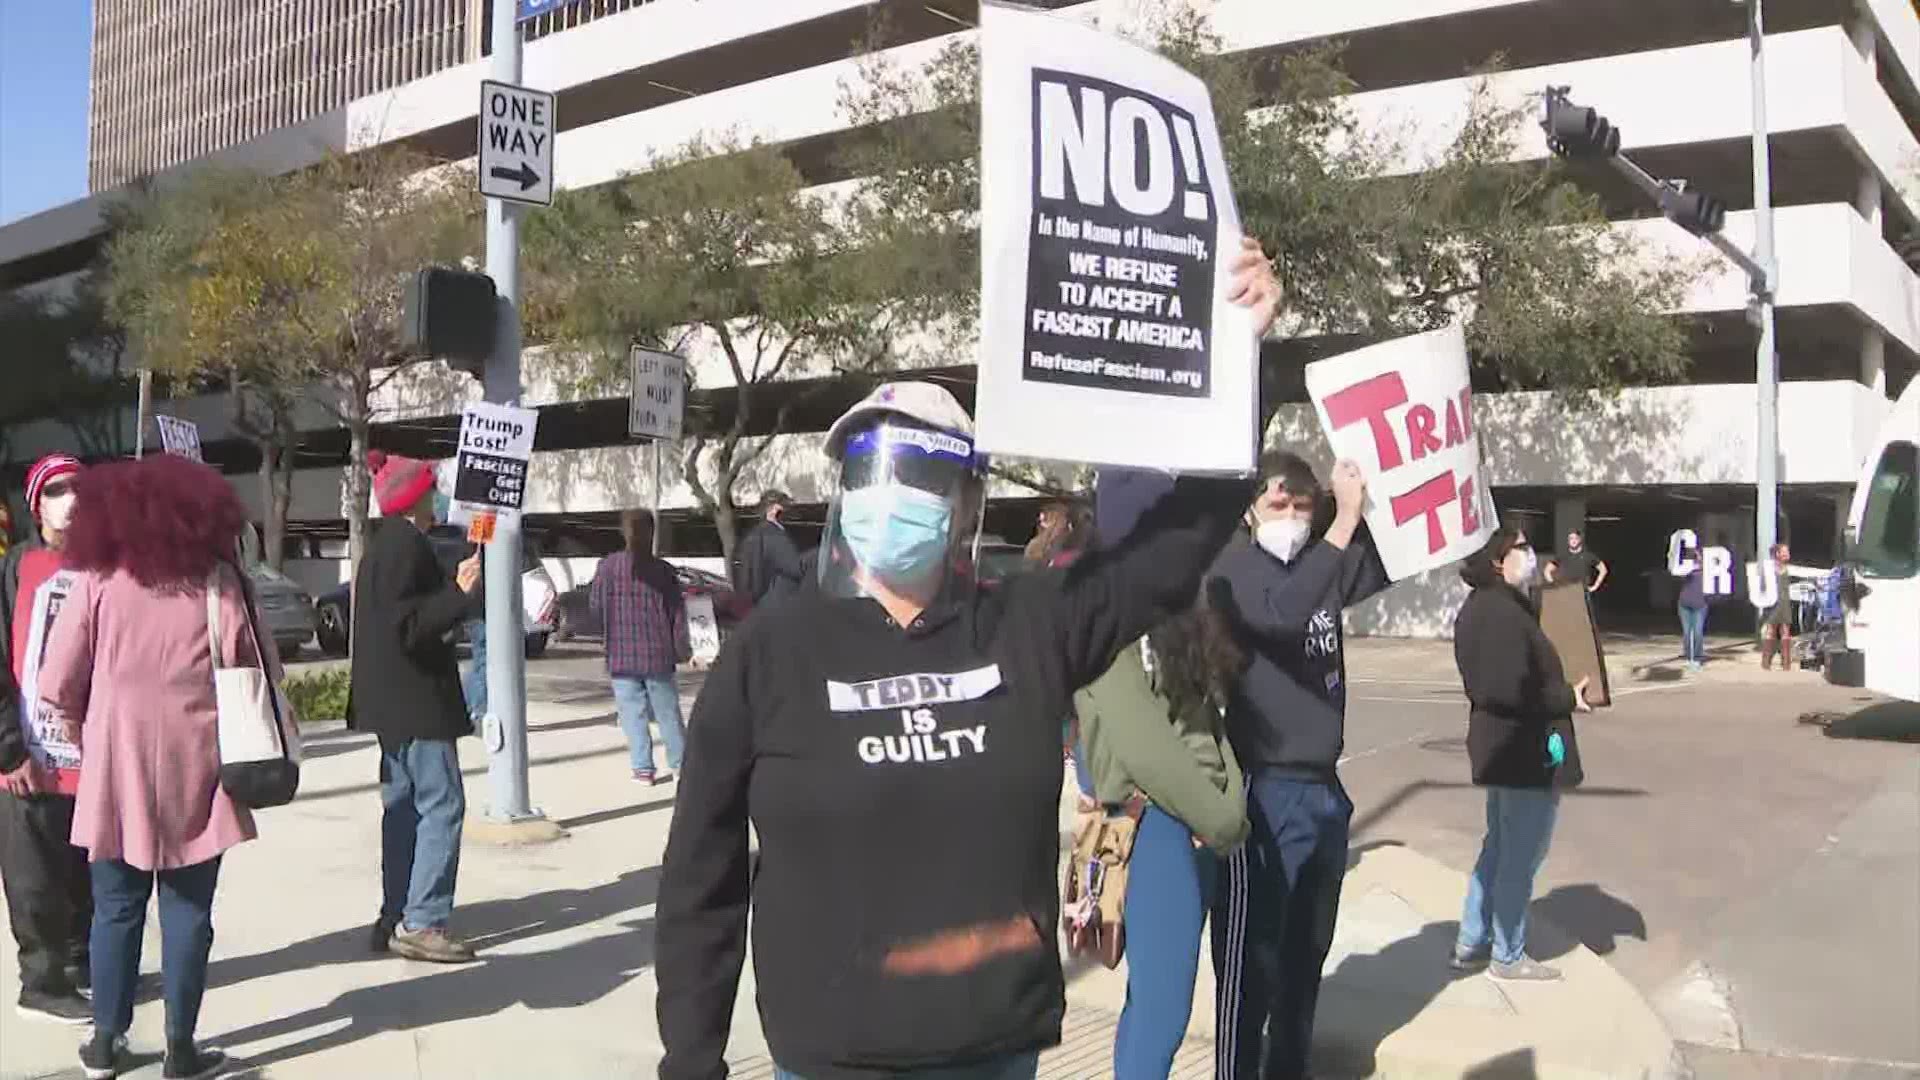 Protesters calling for Sen. Ted Cruz to resign gathered outside his office in downtown Houston Saturday.